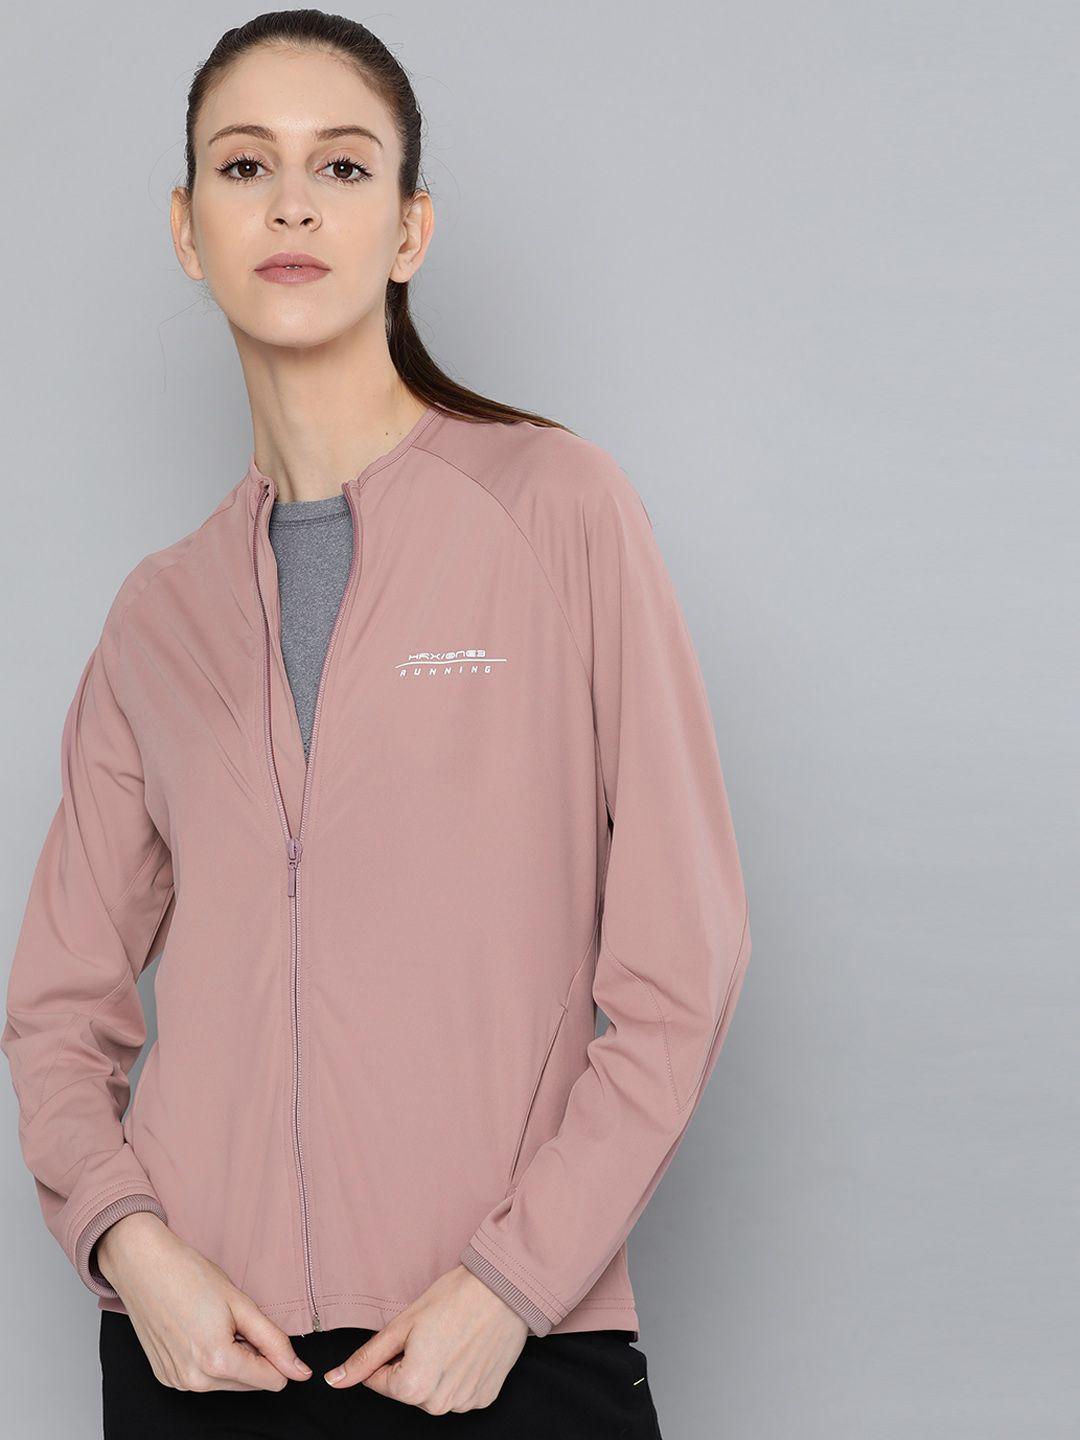 hrx by hrithik roshan women mauve shadows solid rapid-dry antimicrobial running jacket